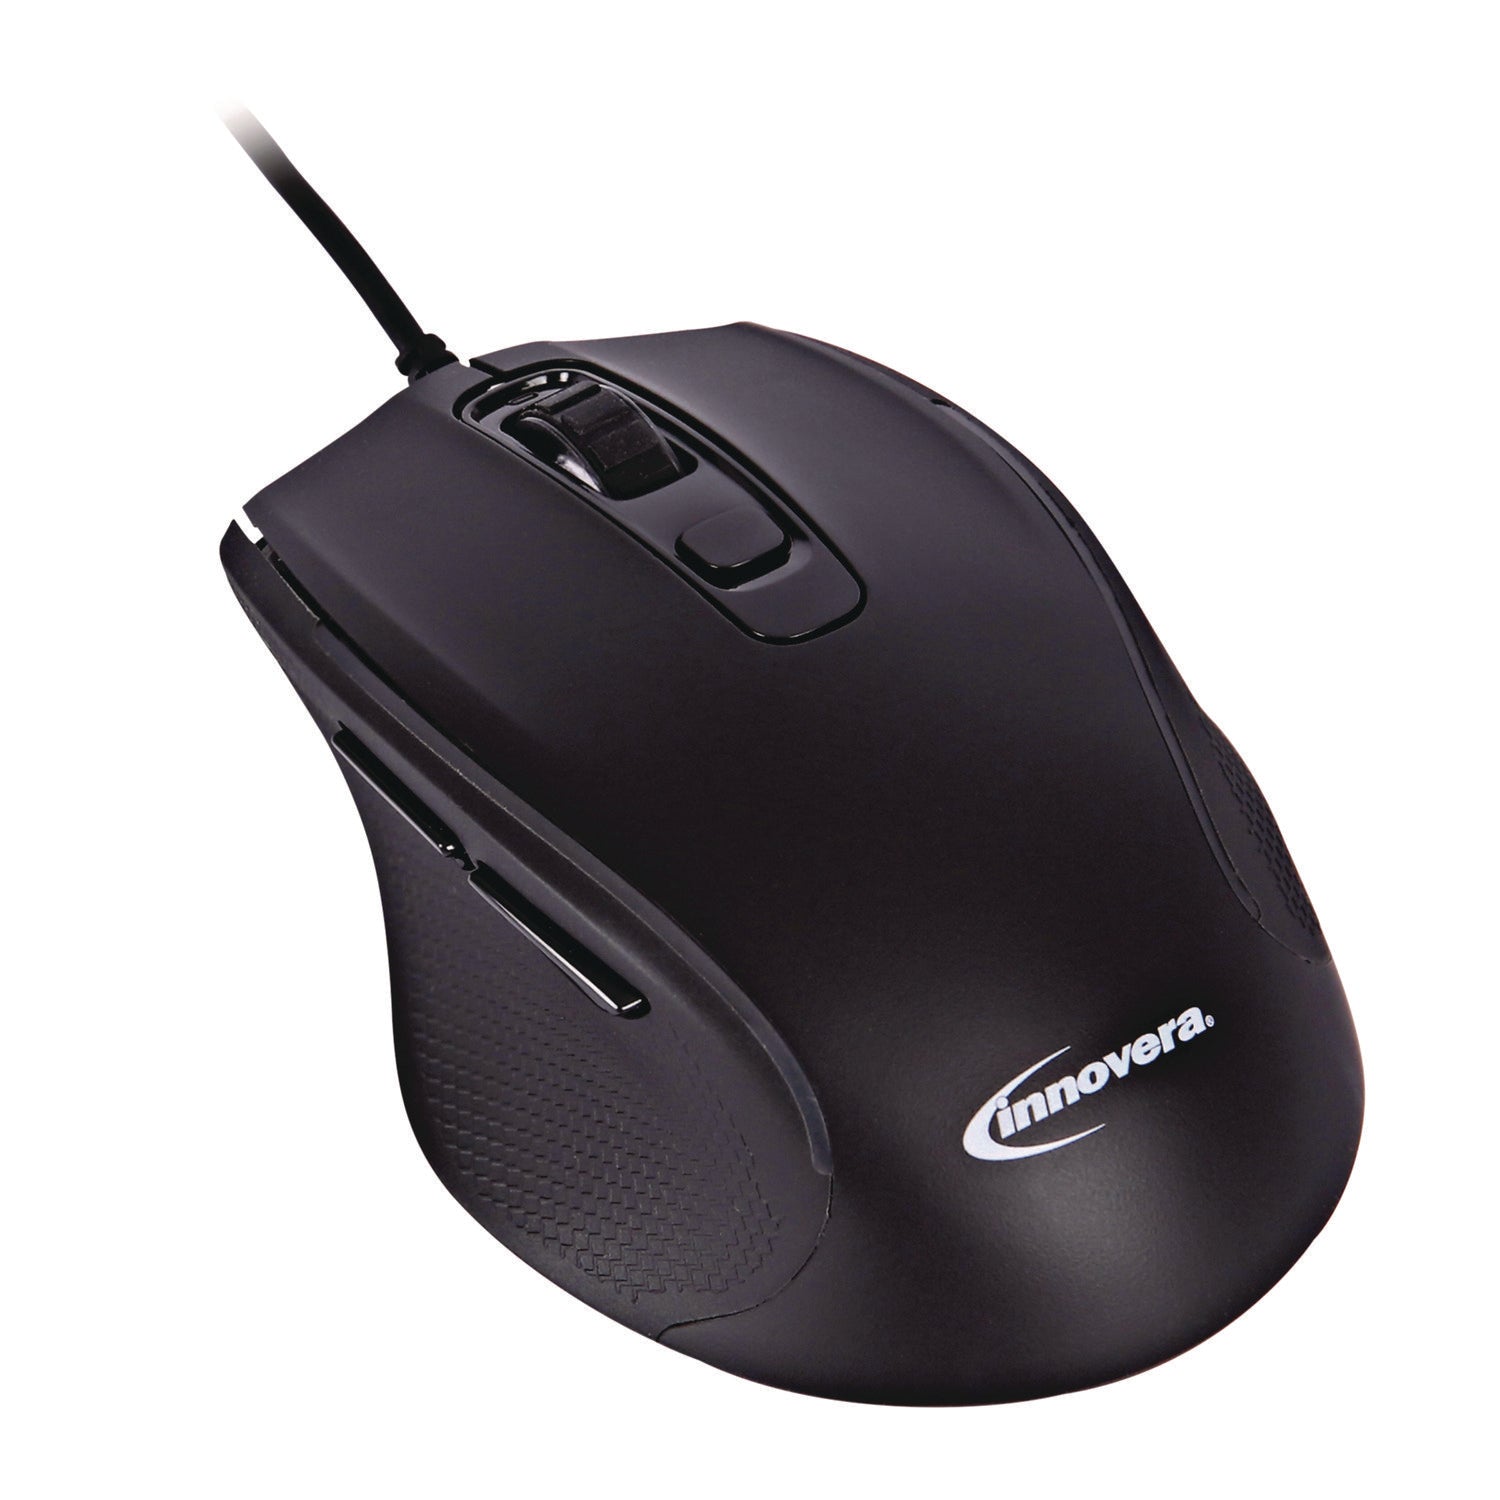 Full-Size Wired Optical Mouse, USB 2.0, Right Hand Use, Black - 